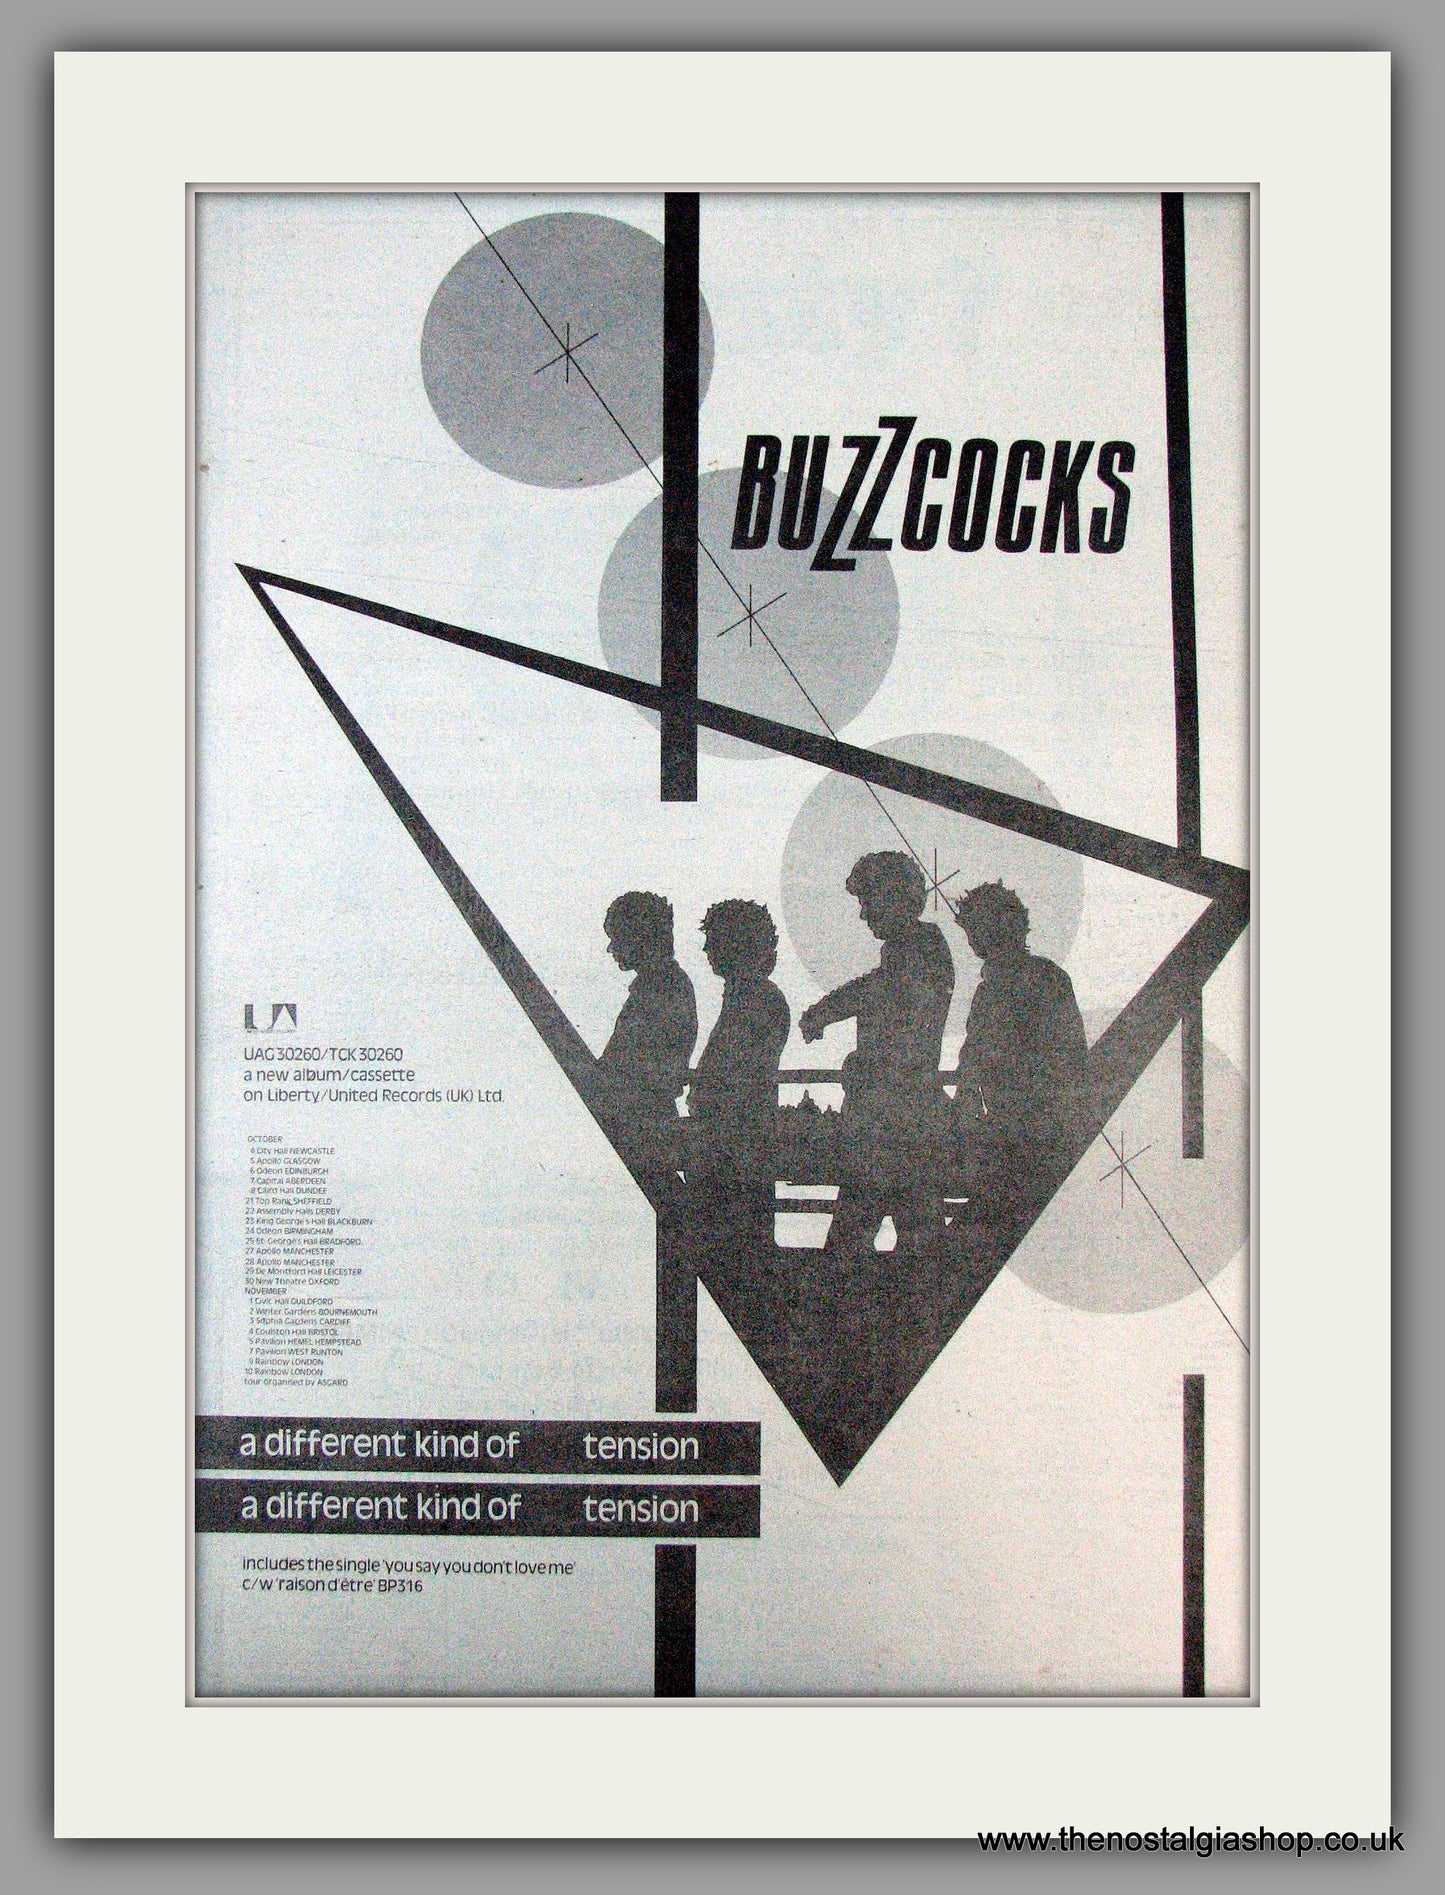 Buzzcocks. A Different Kind of Tension. Vintage Advert 1979 (ref AD9760)